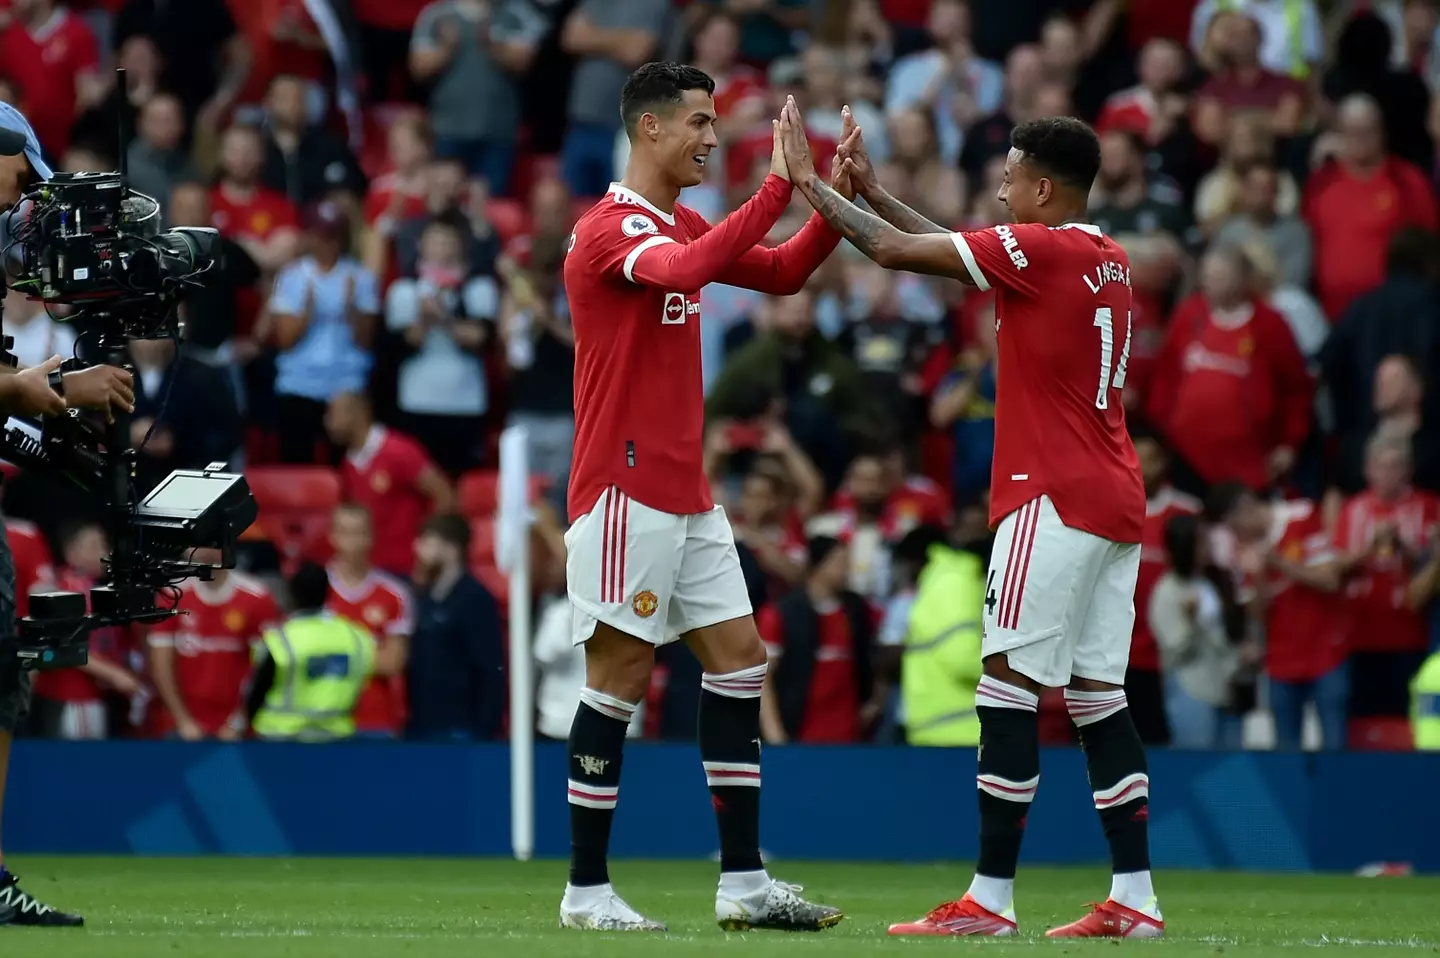 Ronaldo celebrates with Jesse Lingard after Saturday's game. Image: PA Images